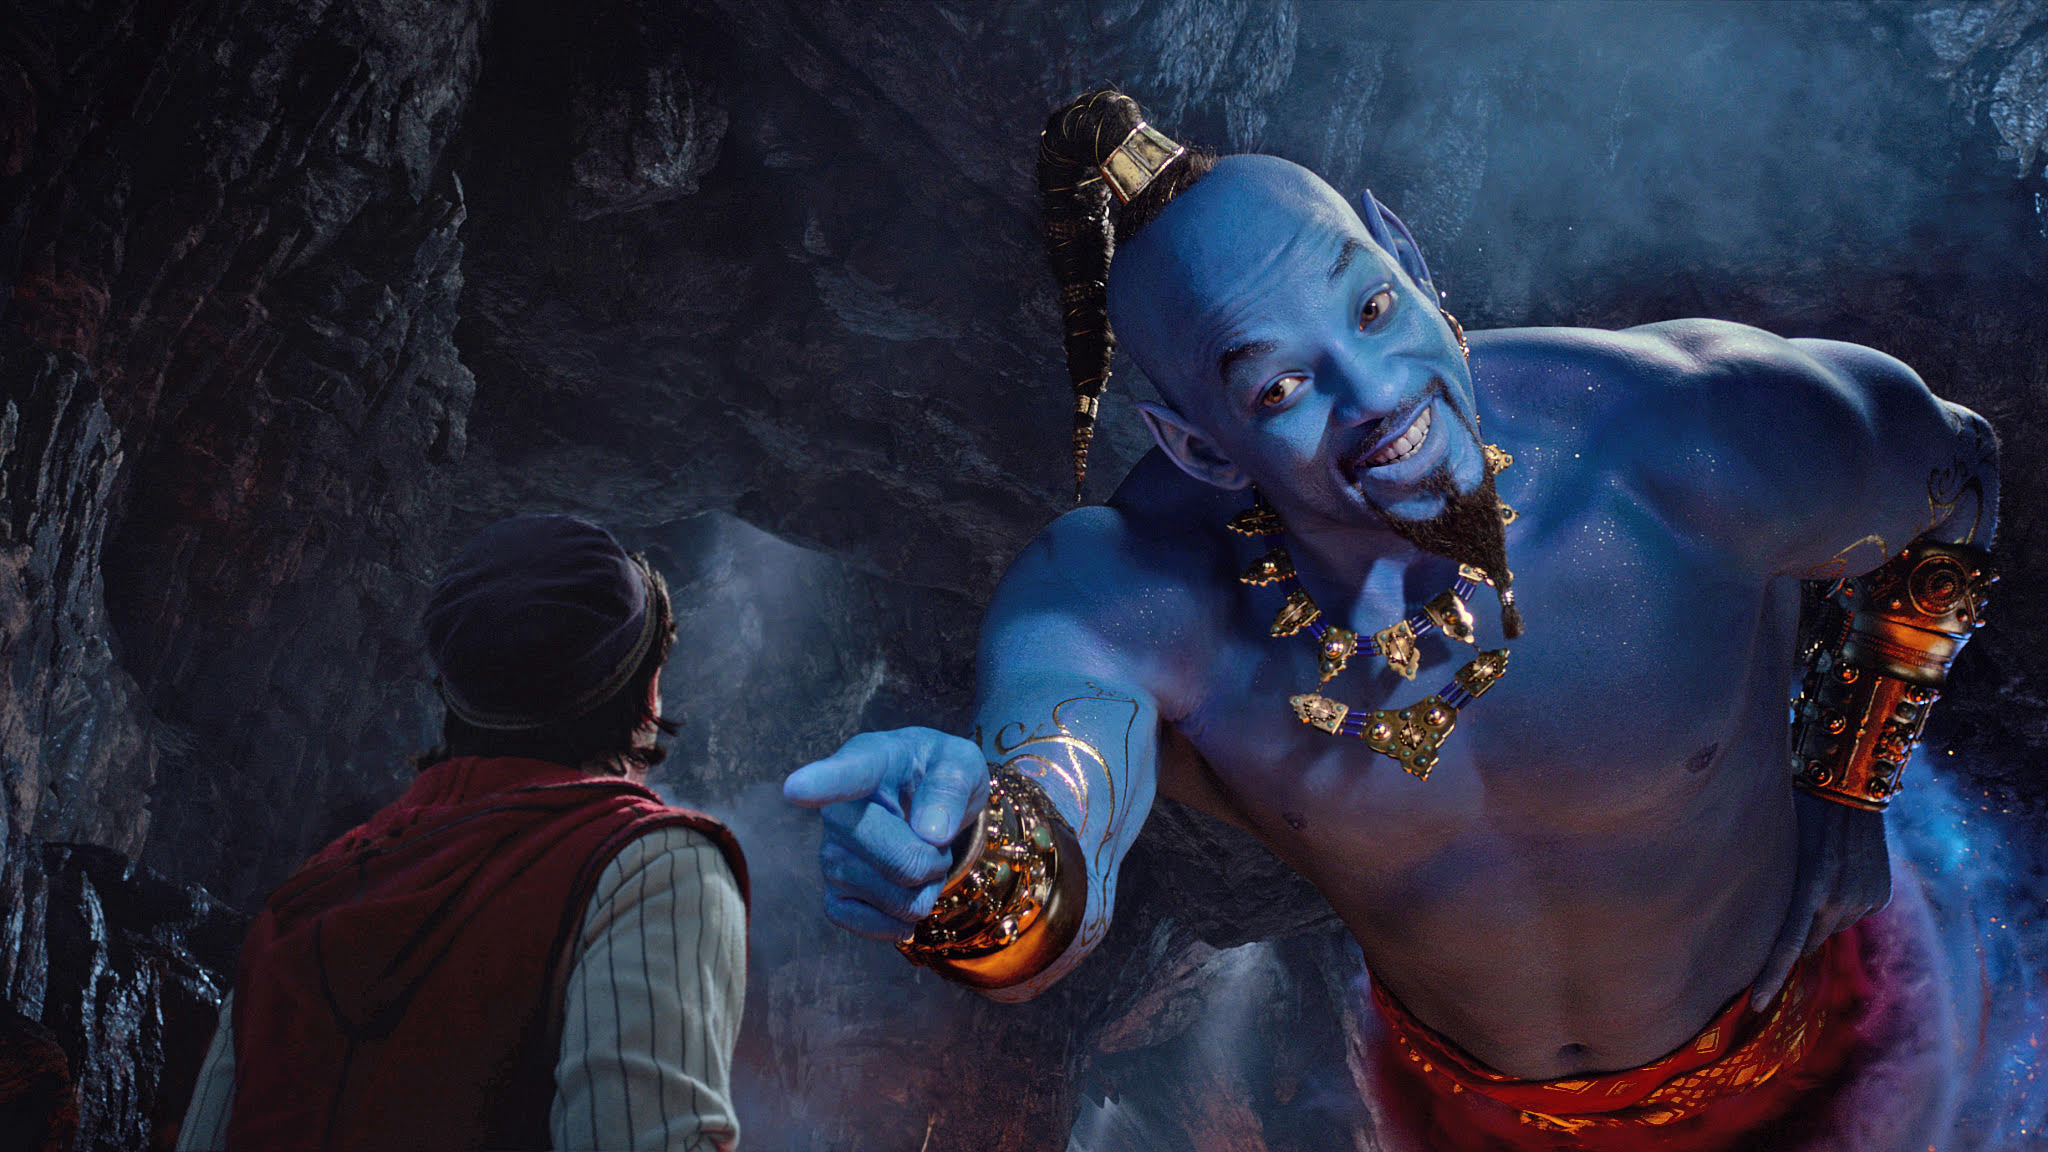 Will Smith Announces Aladdin as the Highest Grossing Film of His Career